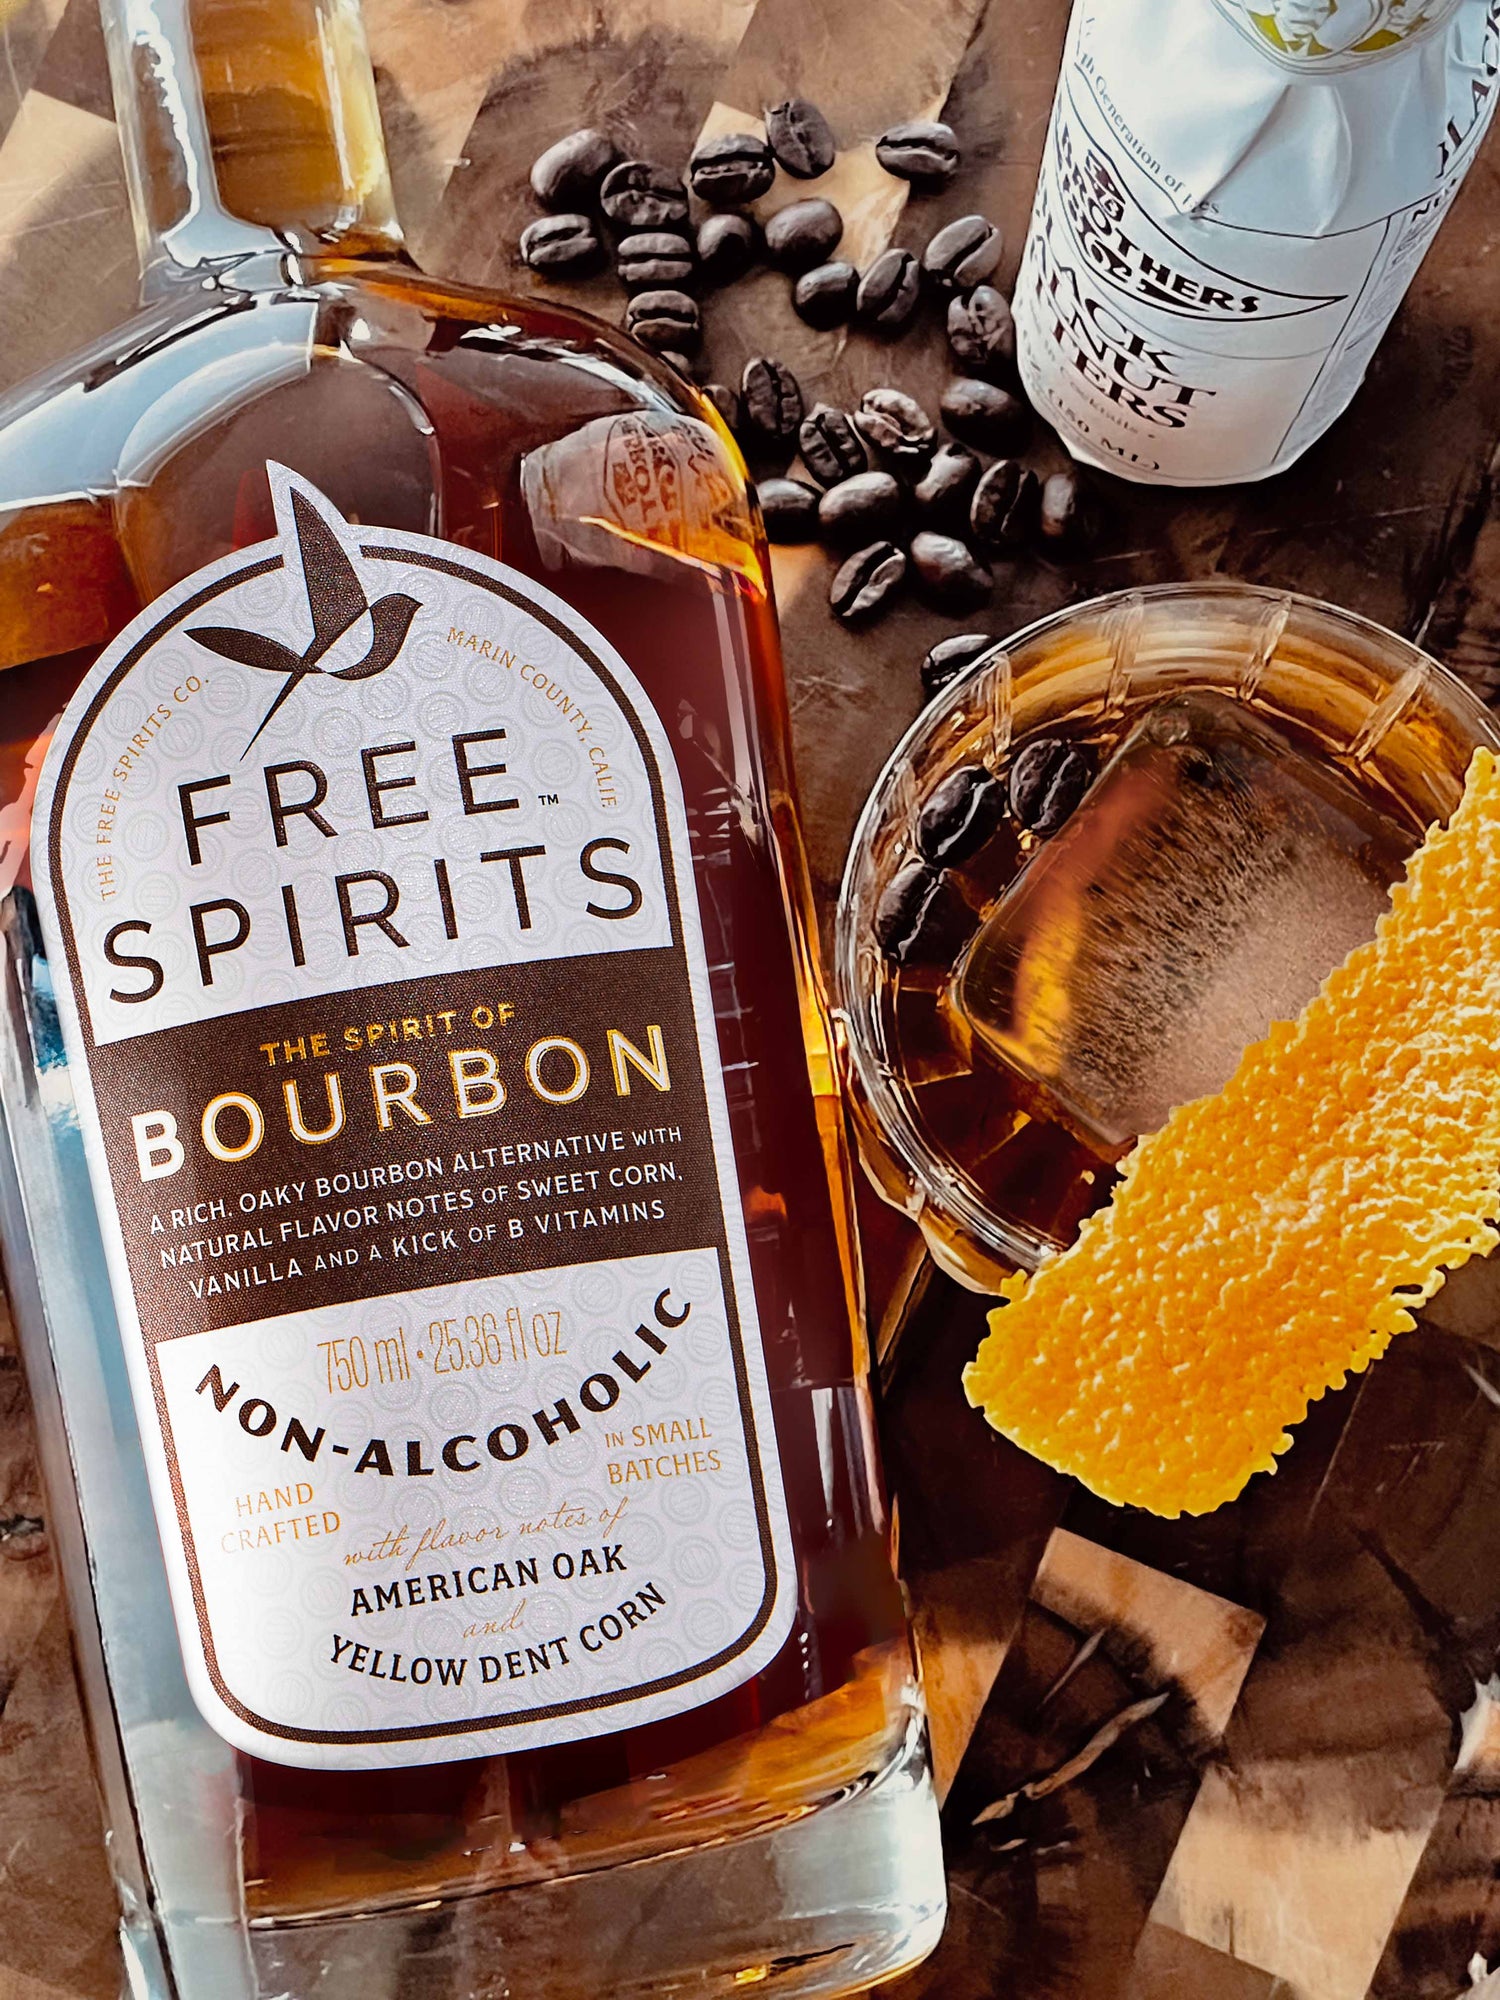 Coffee Bean Old Fashioned - The Spirit of Bourbon